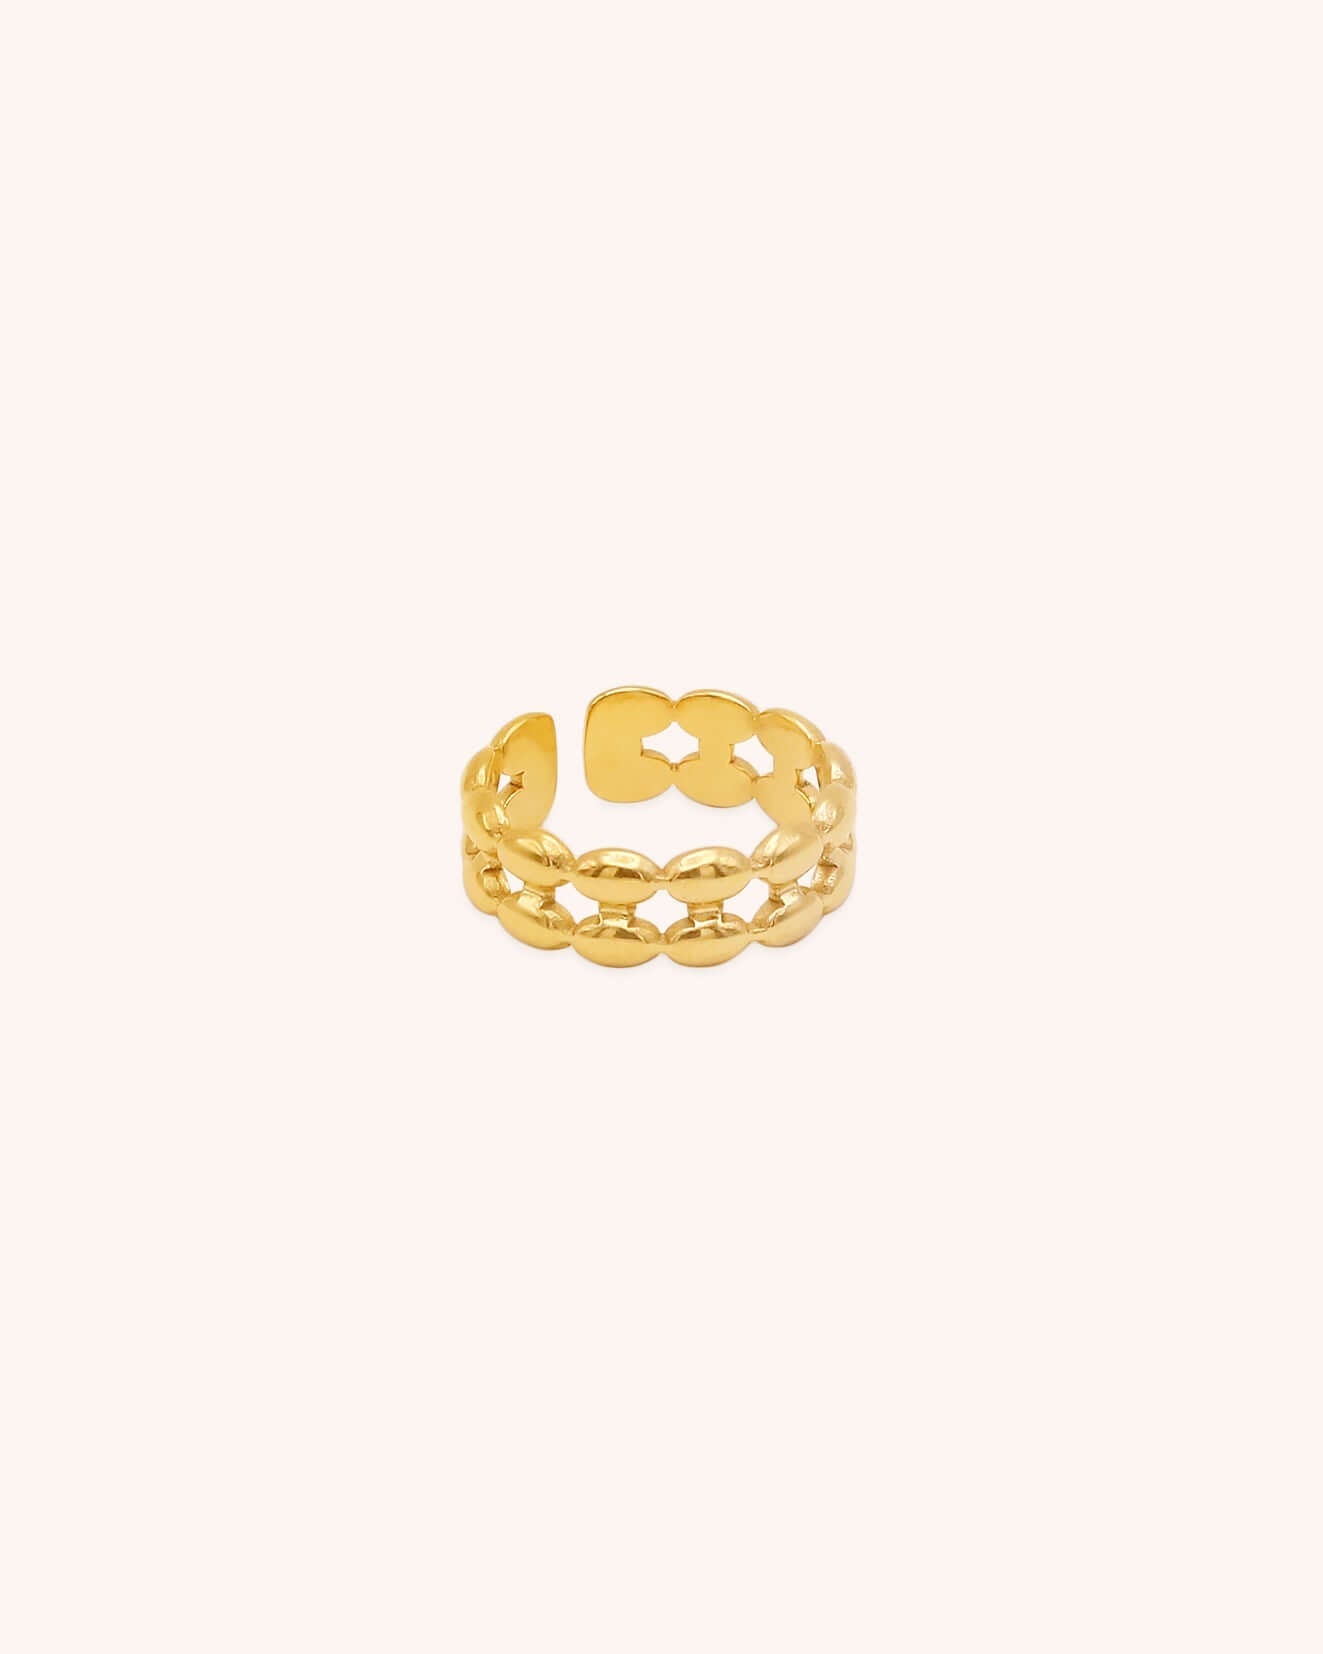 Adjustable Double Row Chain Ring | Stainless Steel - Oia Boutique